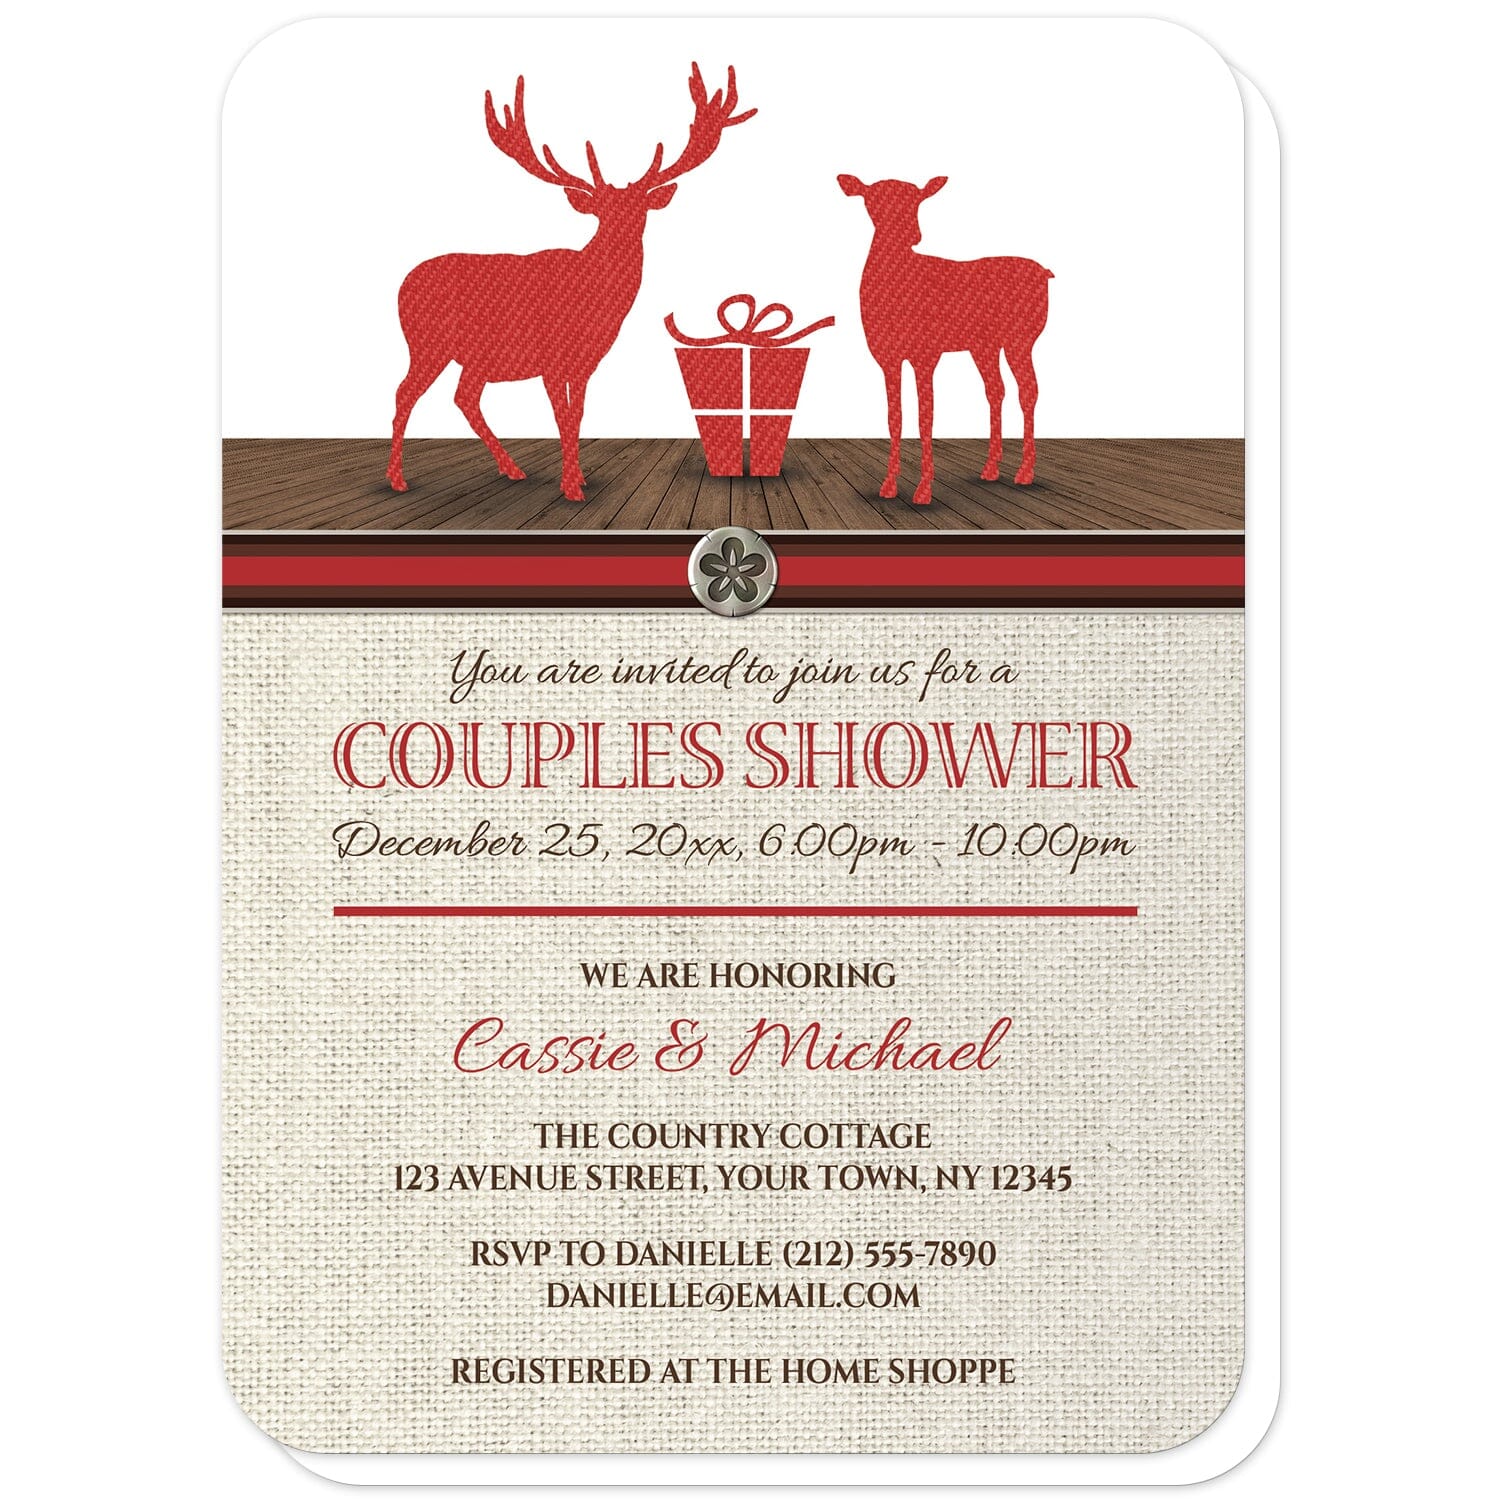 Rustic Deer Burlap Red Holiday Couples Shower Invitations (with rounded corners) at Artistically Invited. Rustic deer burlap red holiday couples shower invitations designed with two deer standing with a present in a red silhouette design with a denim pattern on a brown wood floor at the top of the invitations. Your personalized couples shower celebration details are custom printed in red and brown over a beige burlap background illustration. 